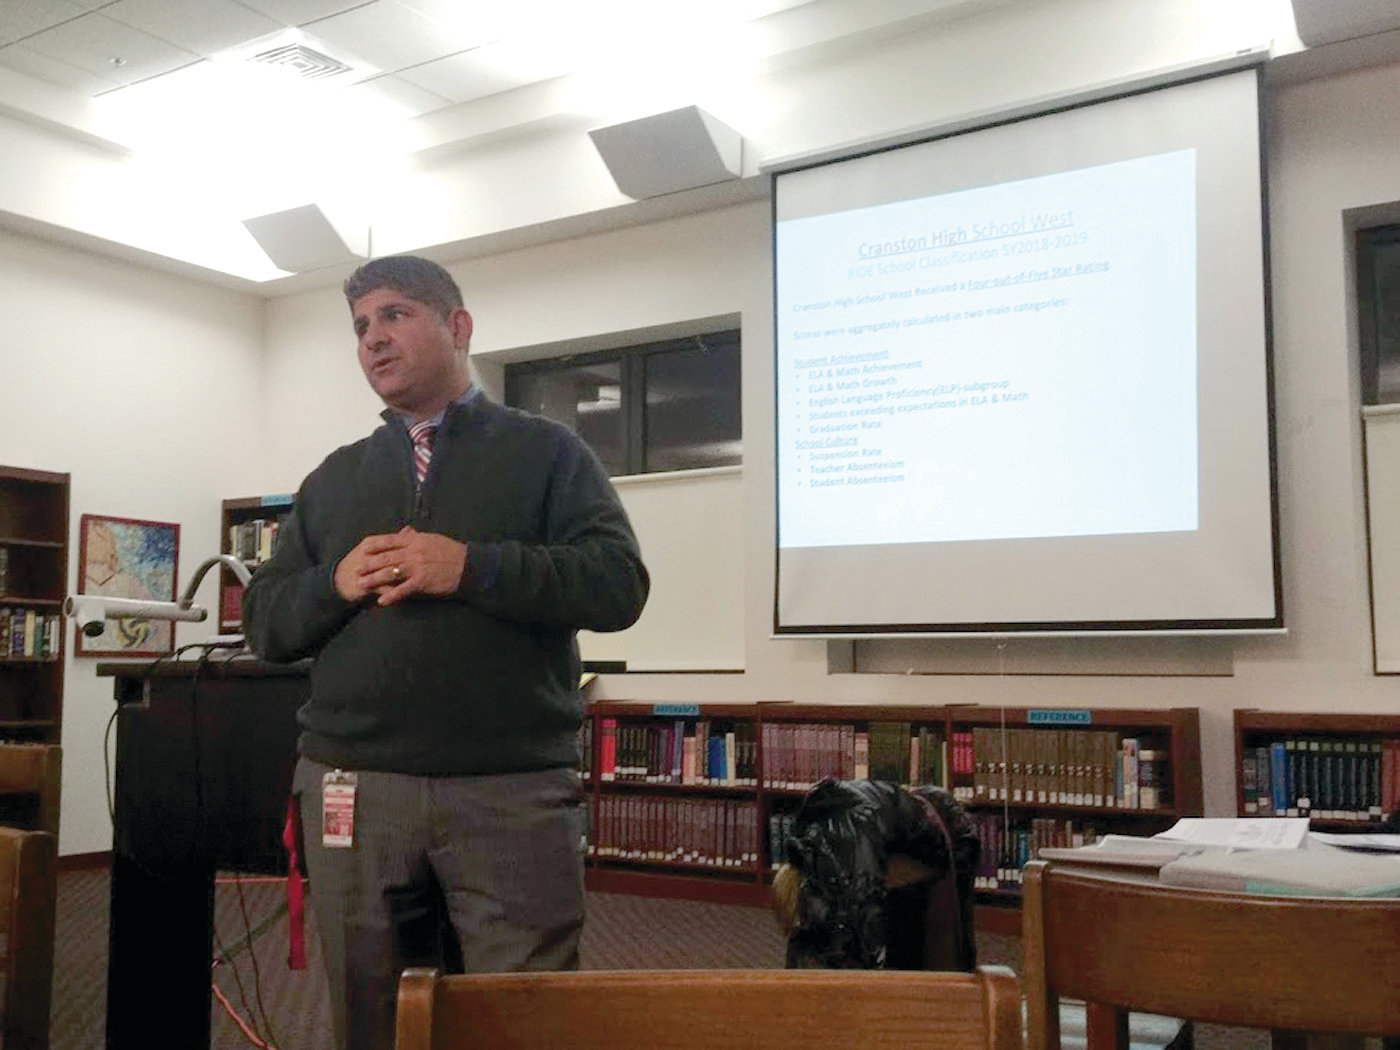 IMPACT OF ABSENTEEISM: Principal Tom Barbieri shared his session with Assistant Principal David Schiappa. Barbieri spoke about the school’s four-star rating on the new state accountability reports and emphasized how much of an impact unexcused student absenteeism had on the school’s rating.